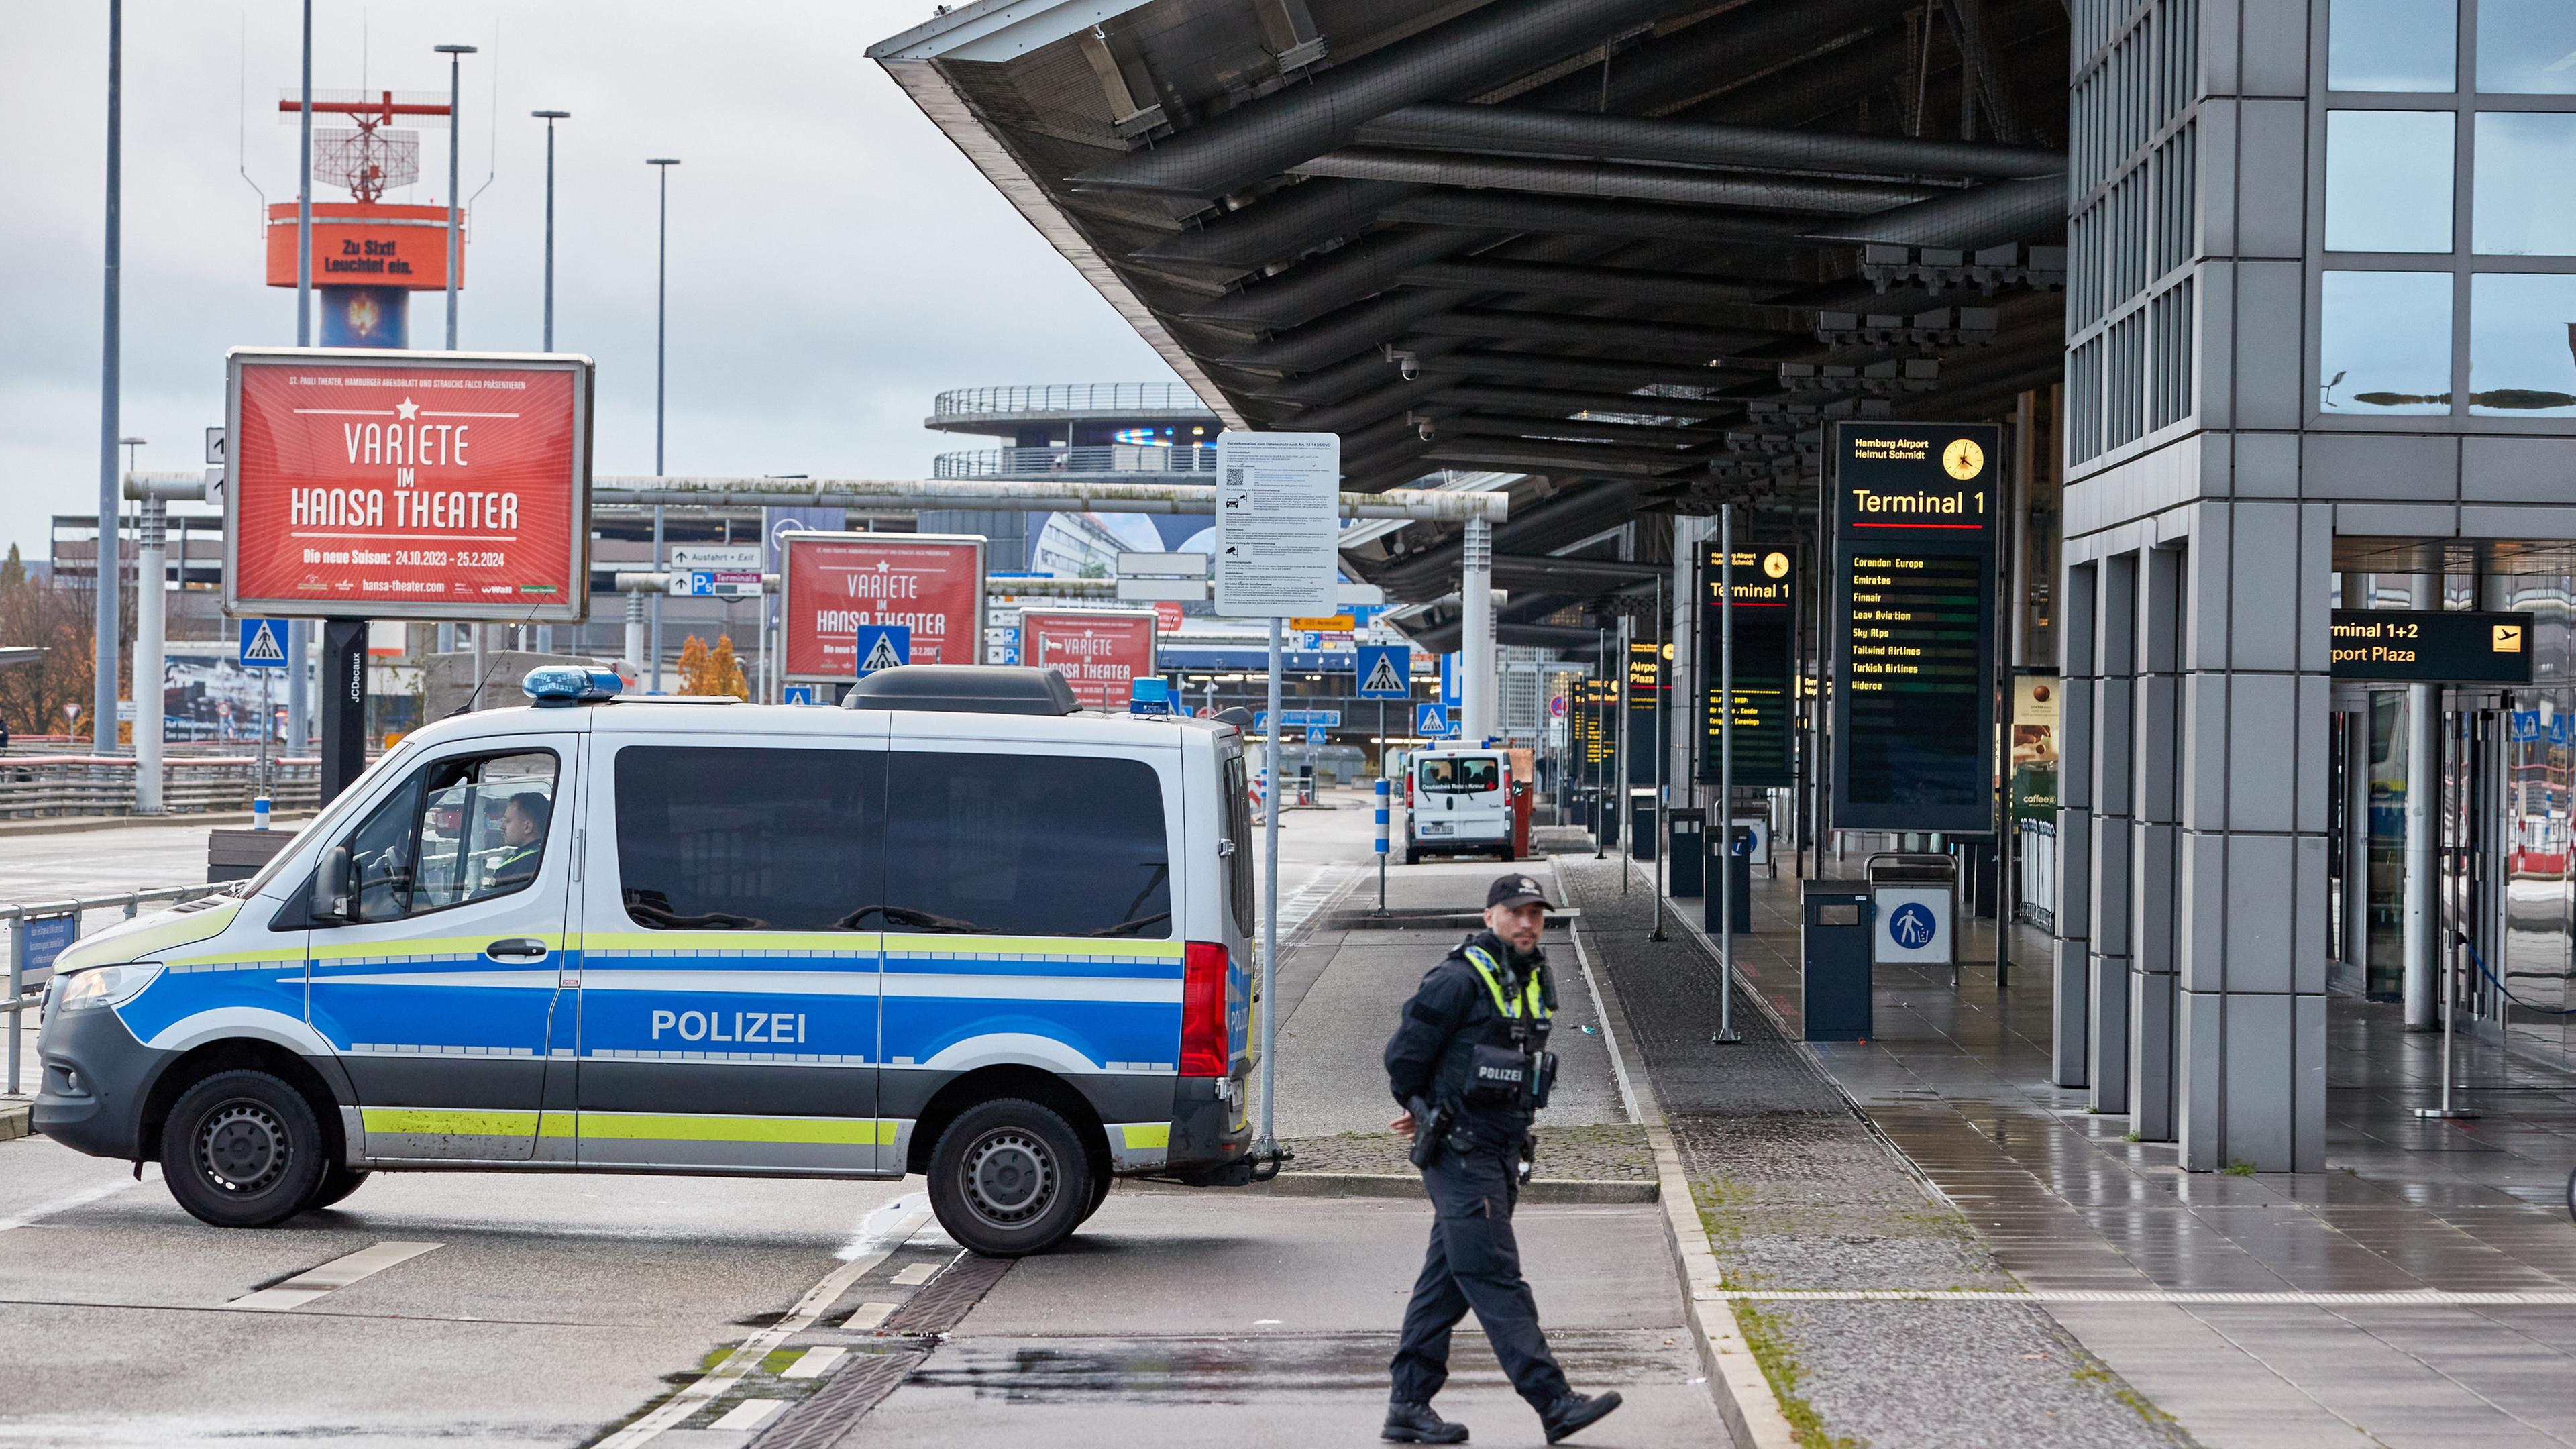 Hostage situation at Hamburg airport ends and suspect arrested